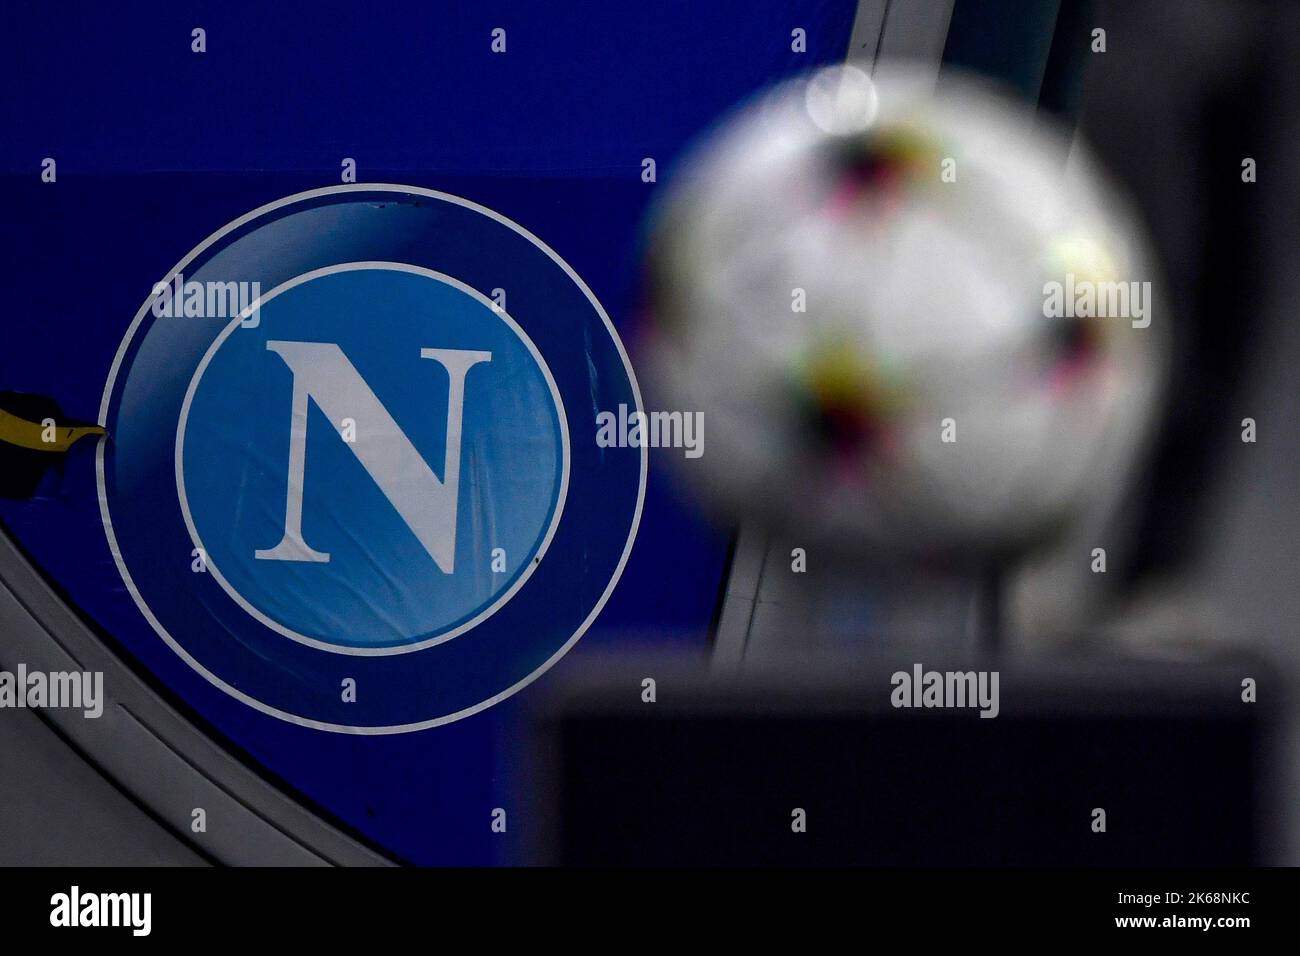 Ssc napoli logo hi-res stock photography and images - Alamy